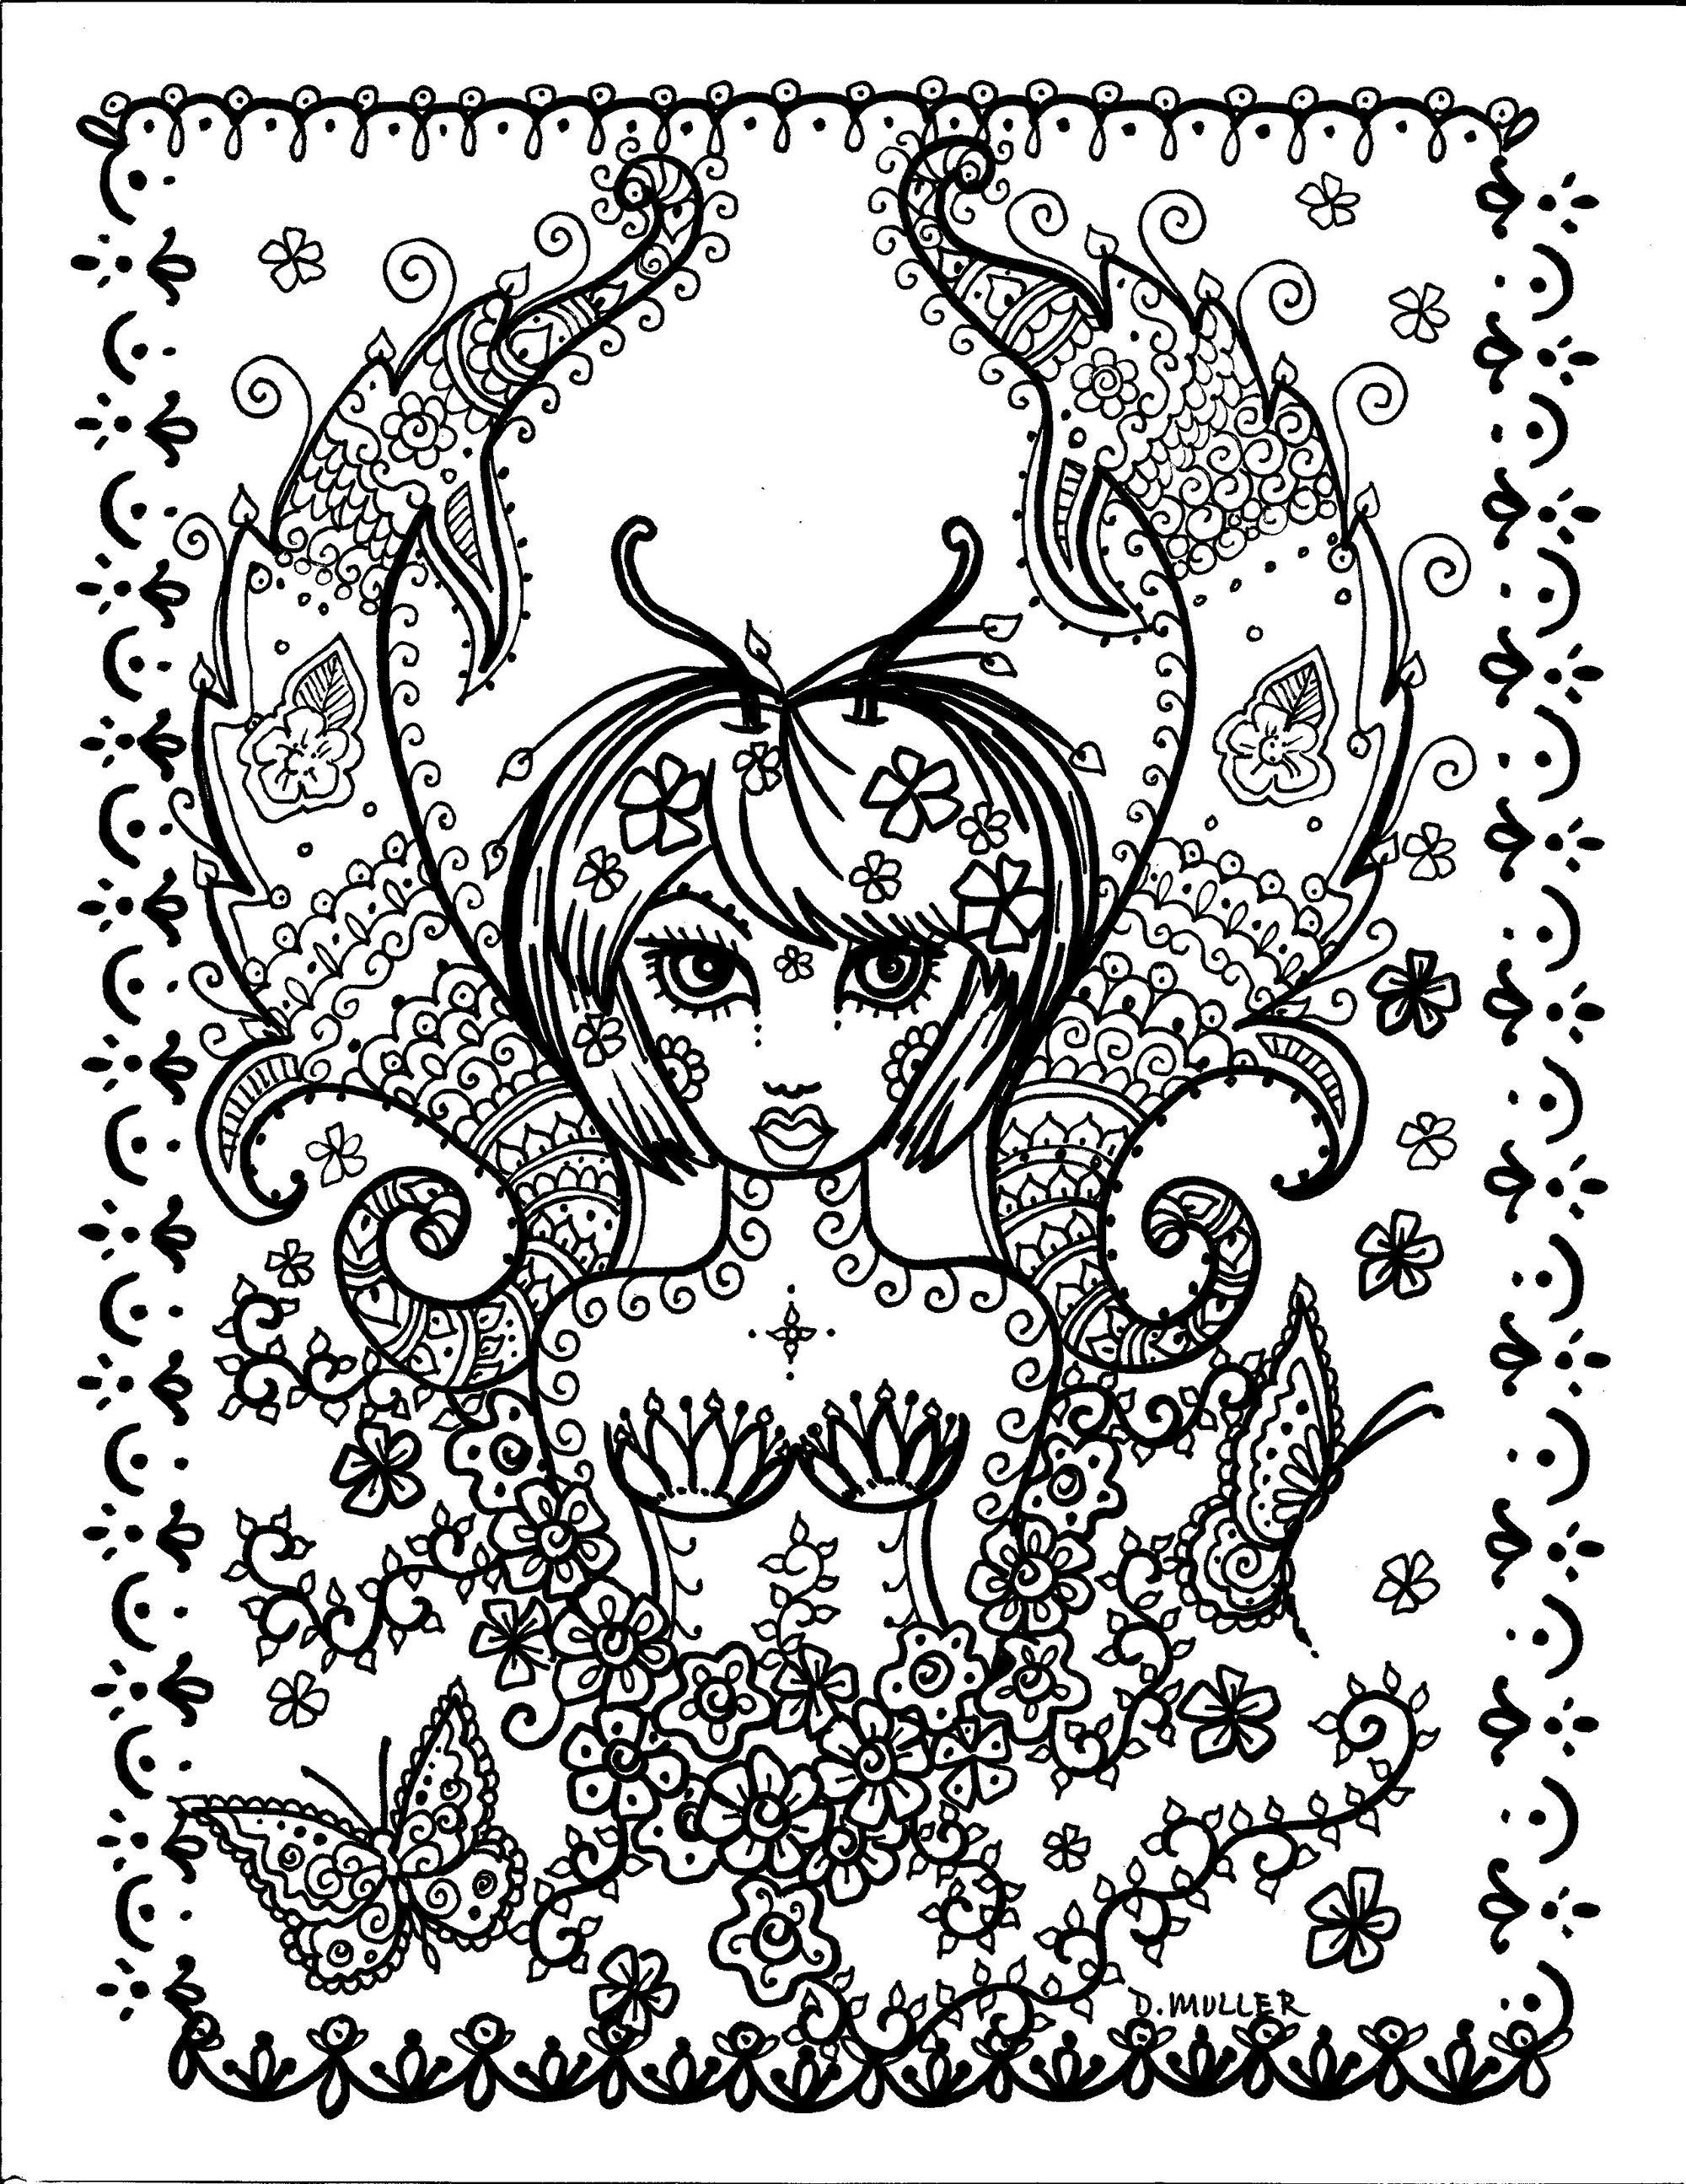 The butterfly girl. And here's a feminine character, a cross between a woman and a butterfly...Her wings are beautifully decorated, and it's up to you to color them in.This strange creature is surrounded by floral and abstract motifs... a great way to let your imagination soar!, Artist : Deborah Muller